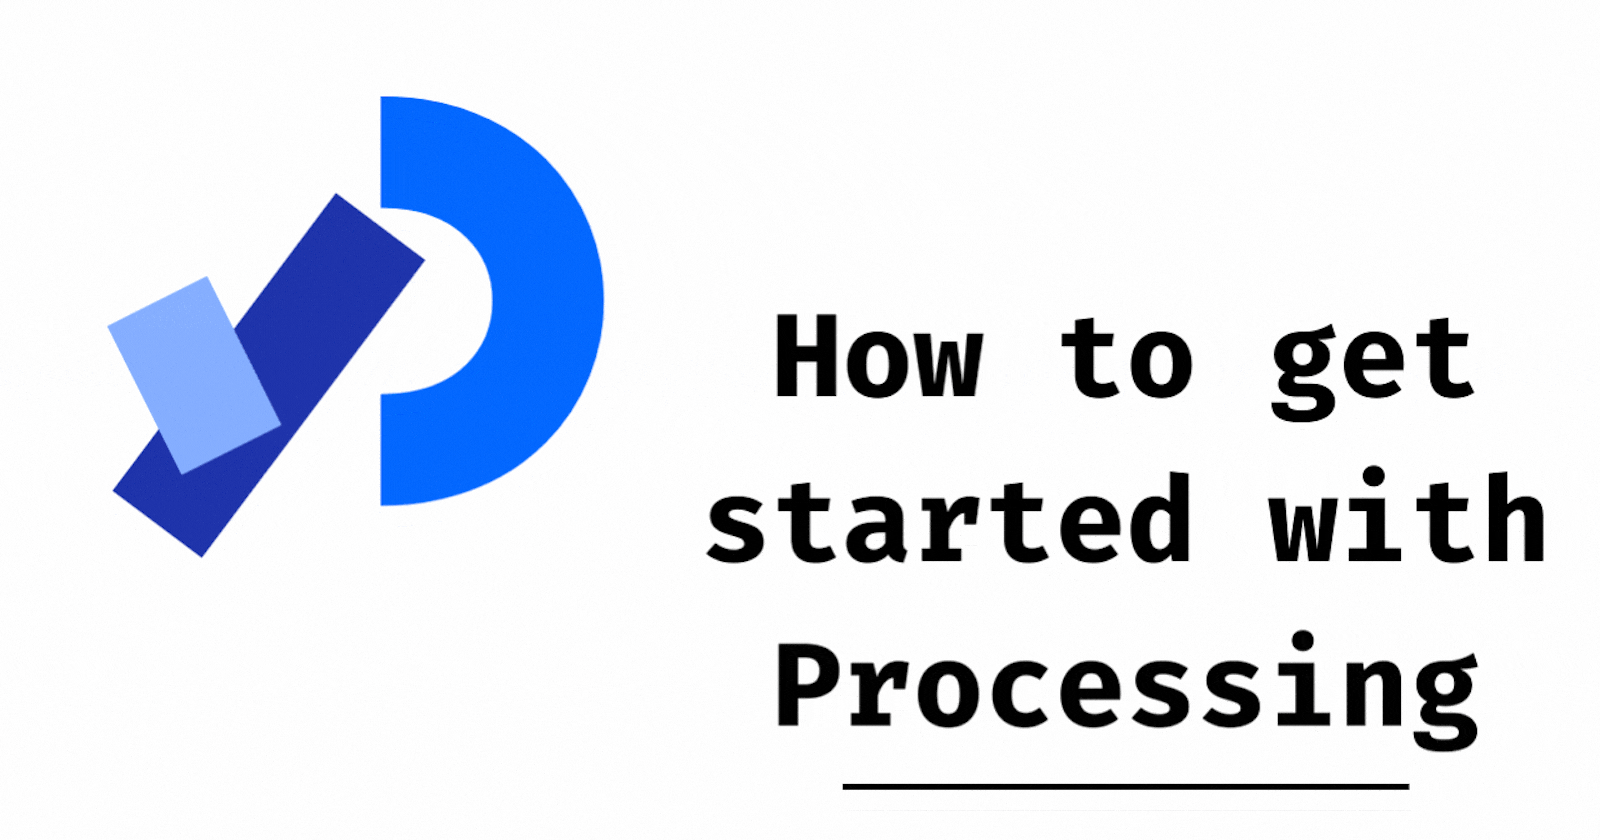 How to get started with Processing(Java)?